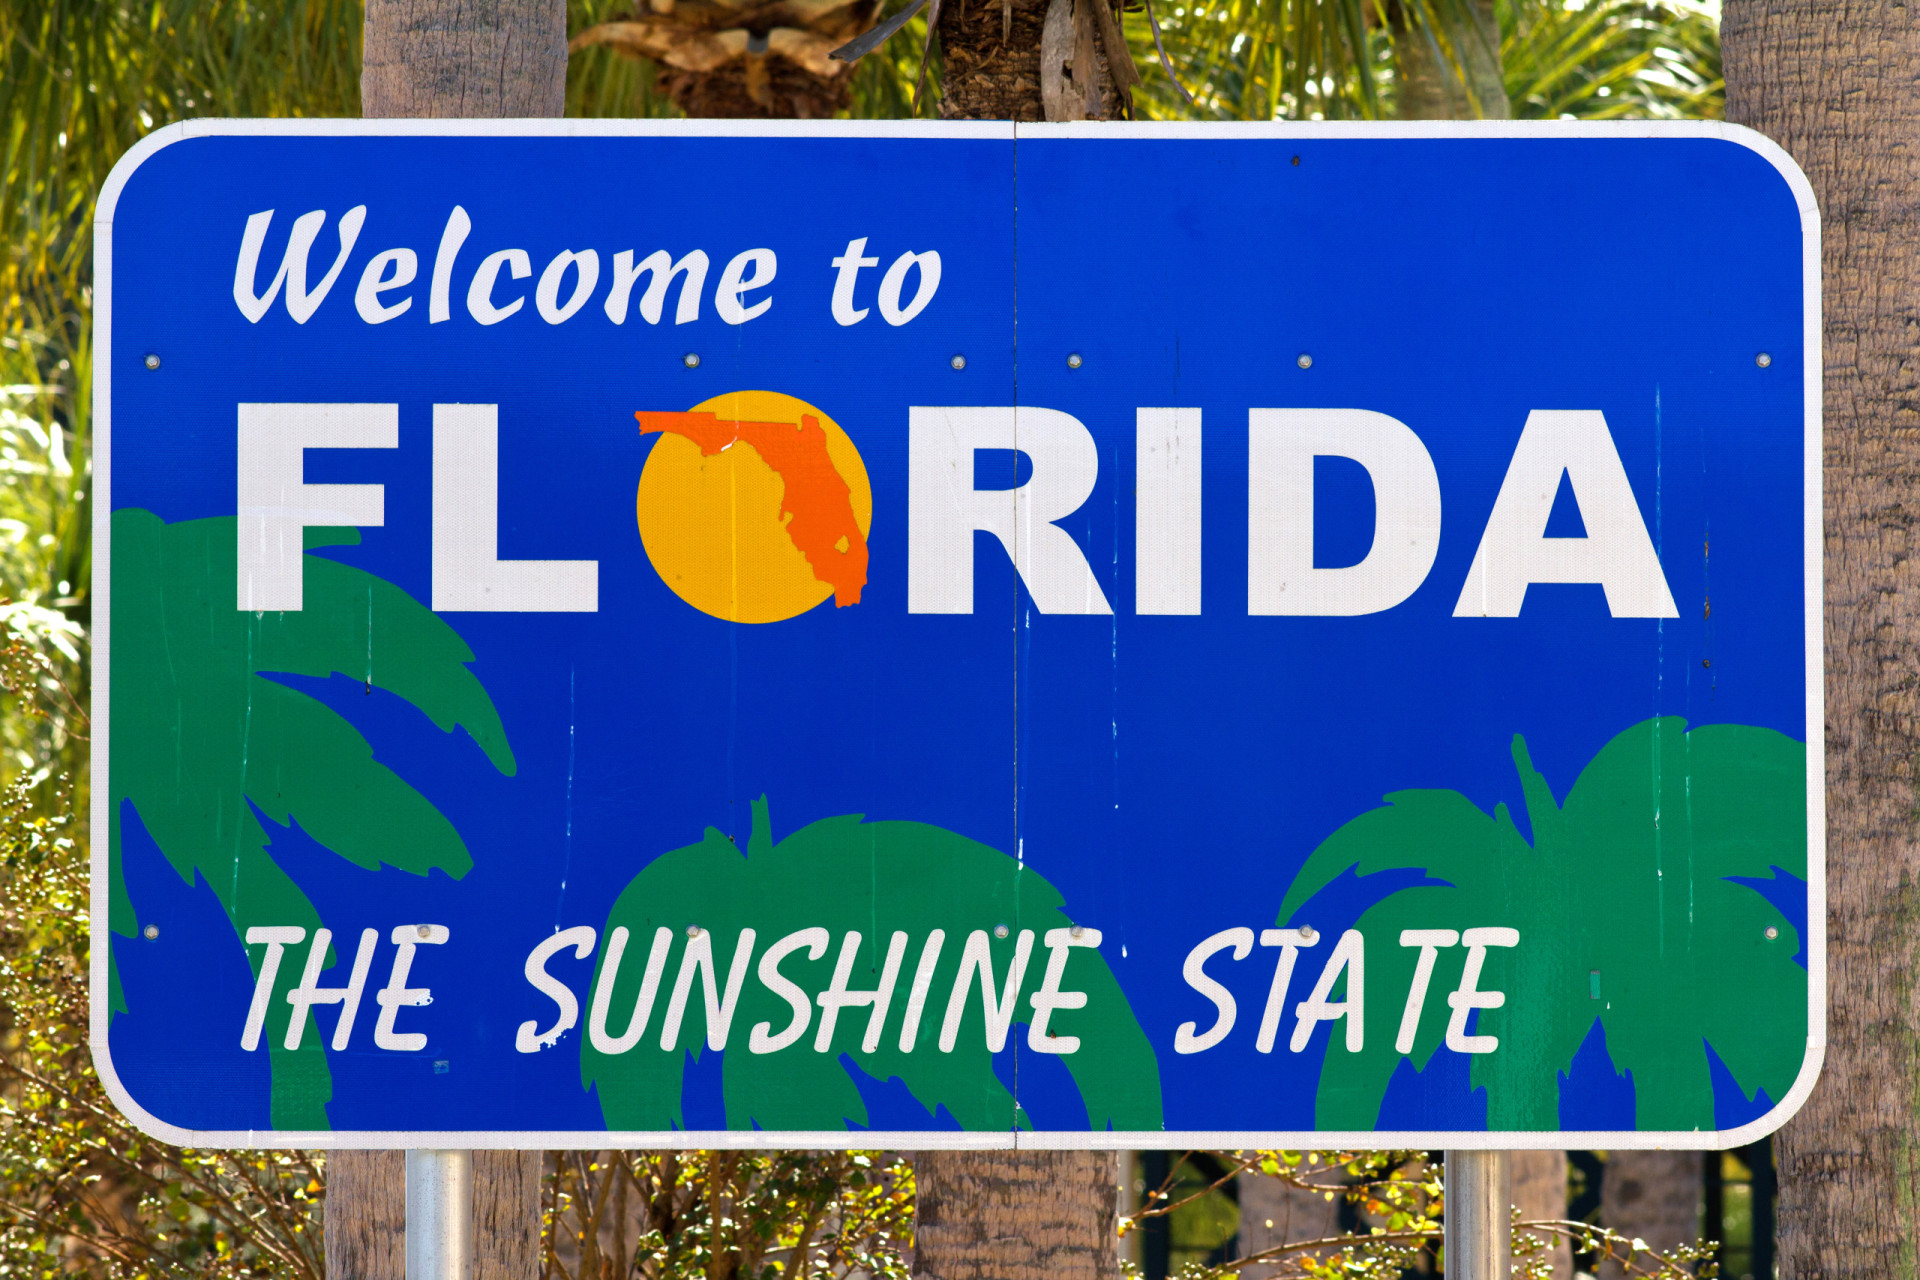 <p>Florida is known as the Sunshine State. The sign attempts to capture what Florida is about—sun and palm trees! P.S. The sun might just be an orange, which would also make sense given that Florida produces around 70% of the country's citrus fruits. </p><p><a href="https://www.msn.com/en-us/community/channel/vid-7xx8mnucu55yw63we9va2gwr7uihbxwc68fxqp25x6tg4ftibpra?cvid=94631541bc0f4f89bfd59158d696ad7e">Follow us and access great exclusive content every day</a></p>